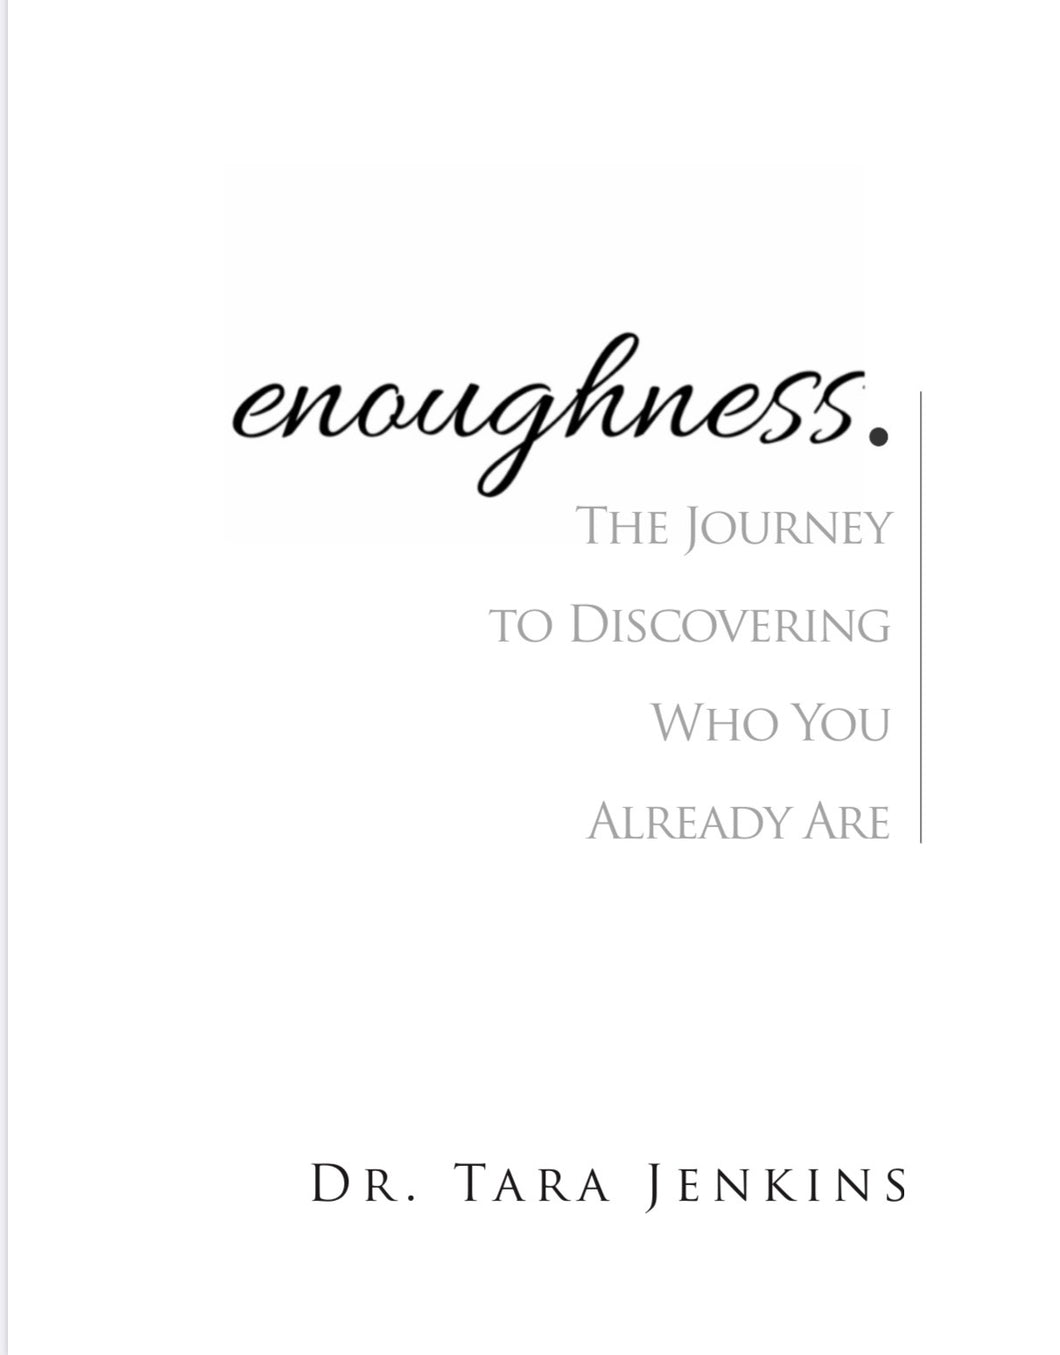 Enoughness: The Journey To Discovering Who You Already Are.